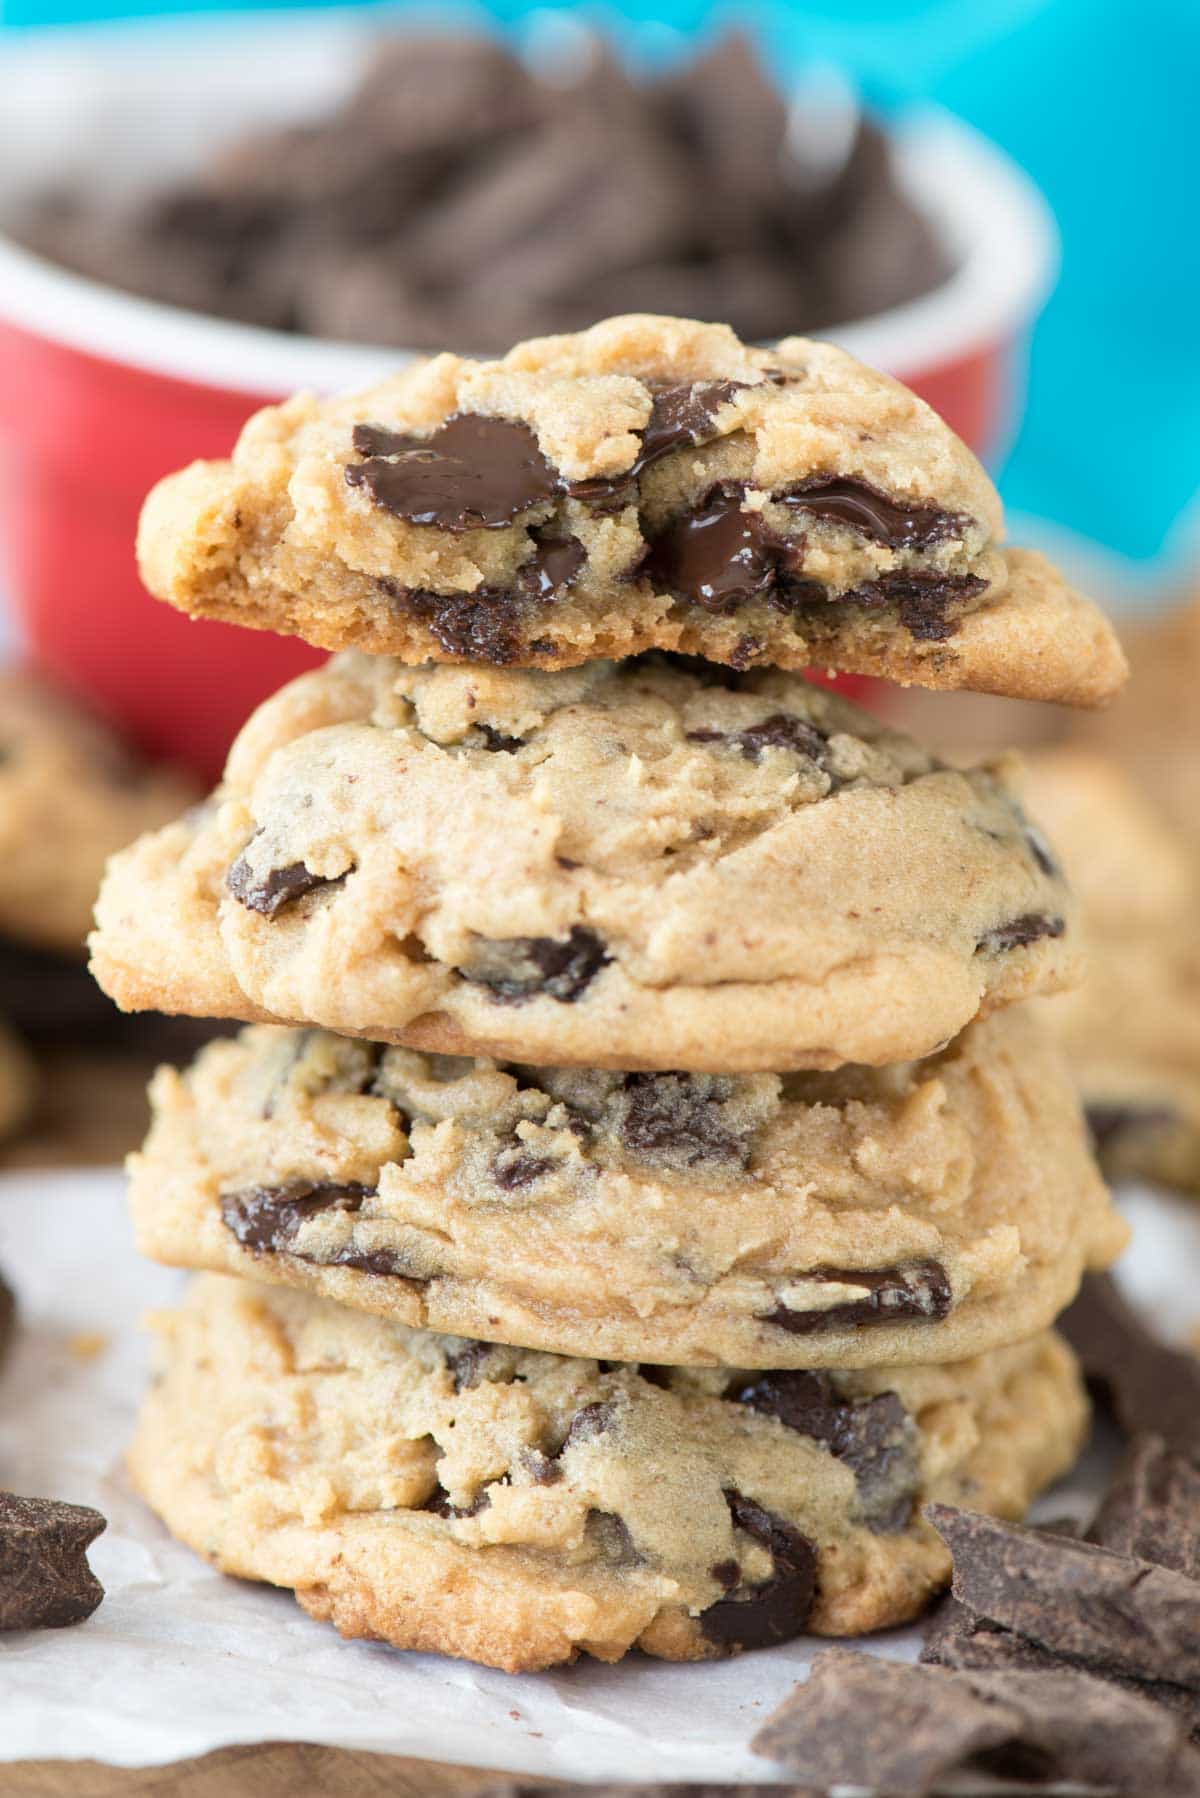 BEST Pudding Cookies Recipe - this is the only cookie recipe you need! Use your favorite pudding mix to make the softest, puffiest cookies that stay fresh for days!